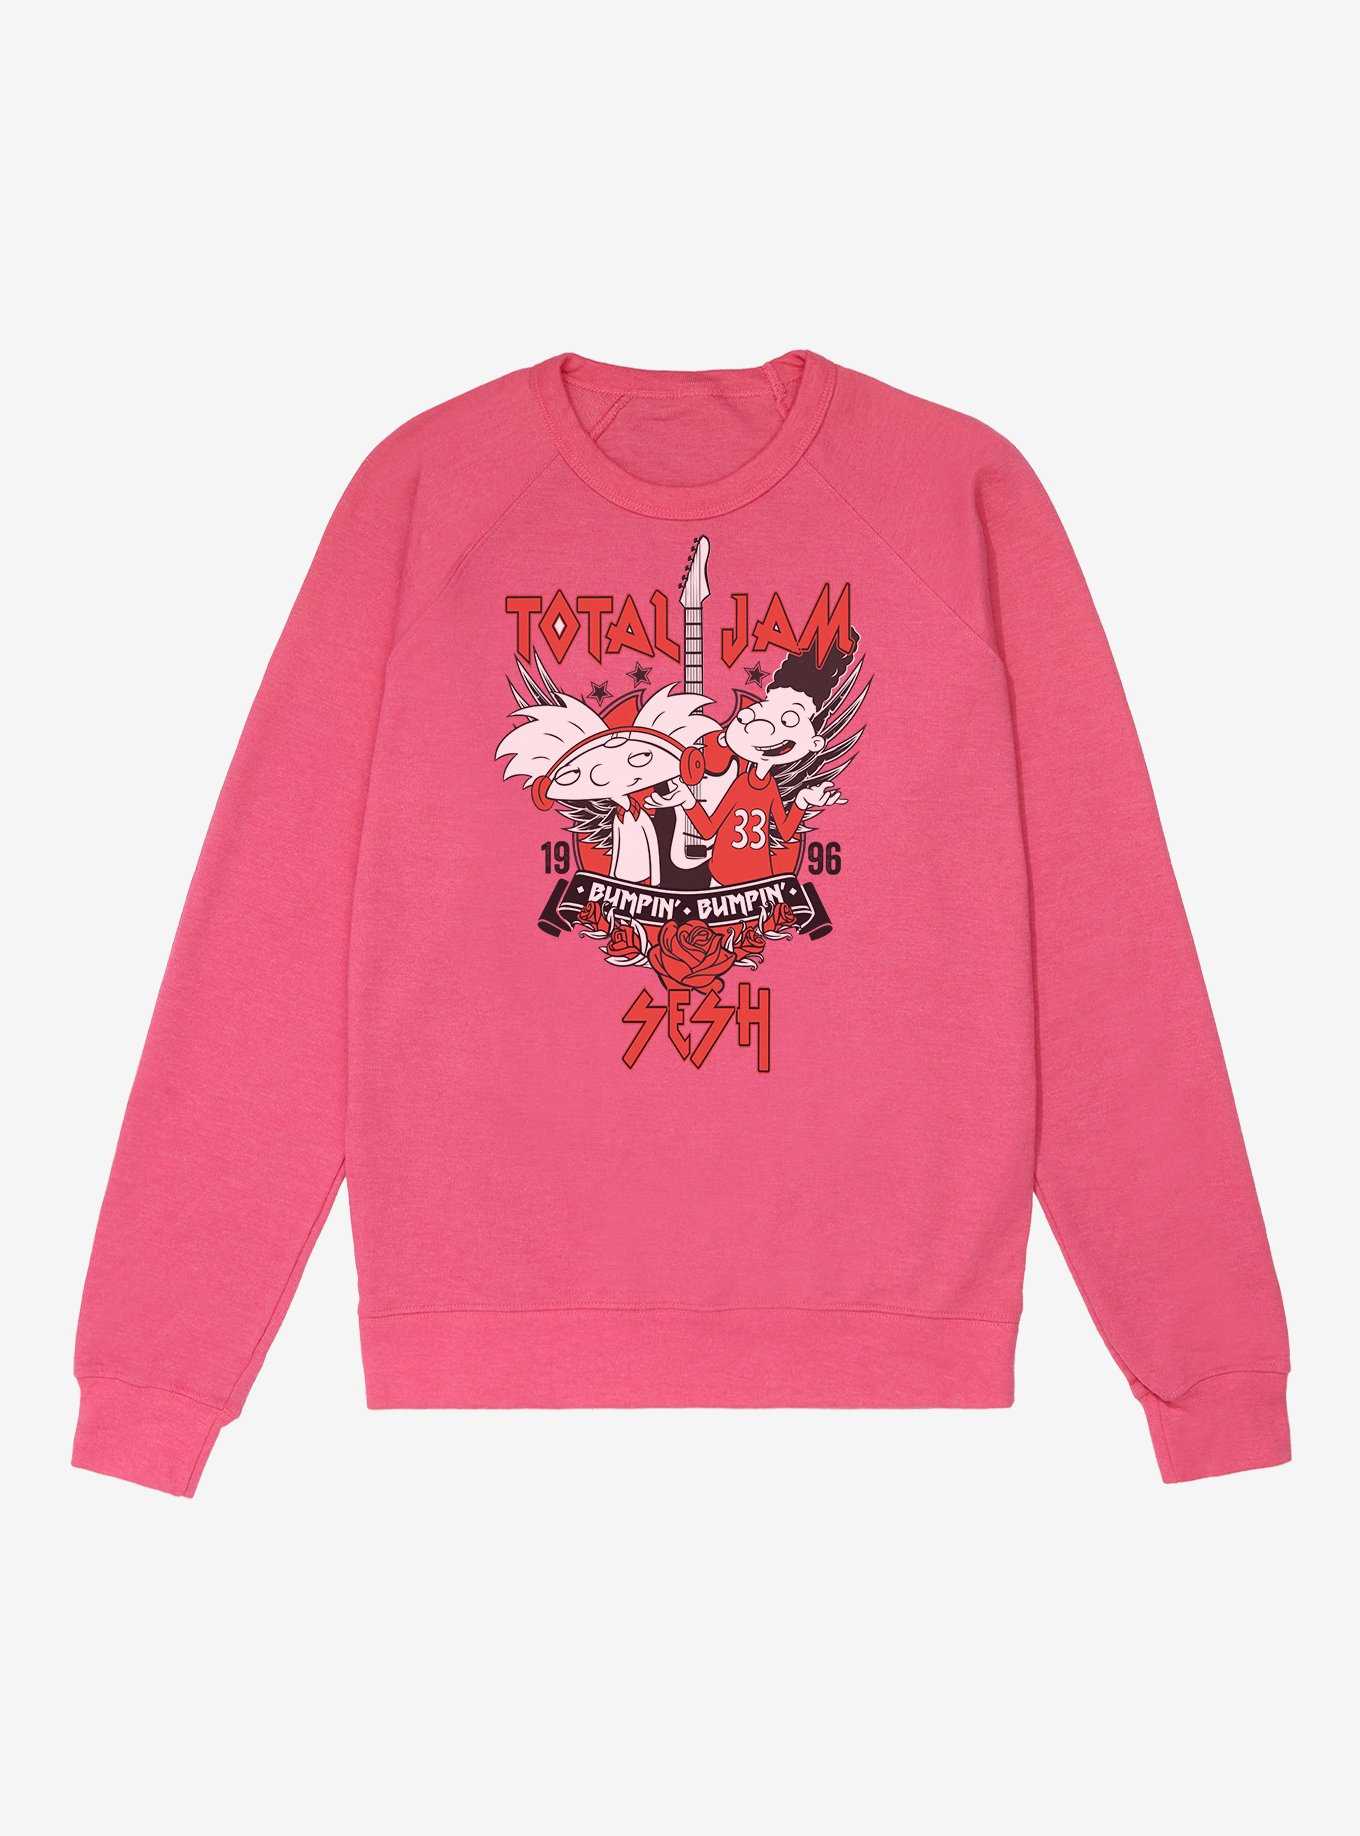 Hey Arnold! Total Jam Sesh 1996 French Terry Sweatshirt, , hi-res